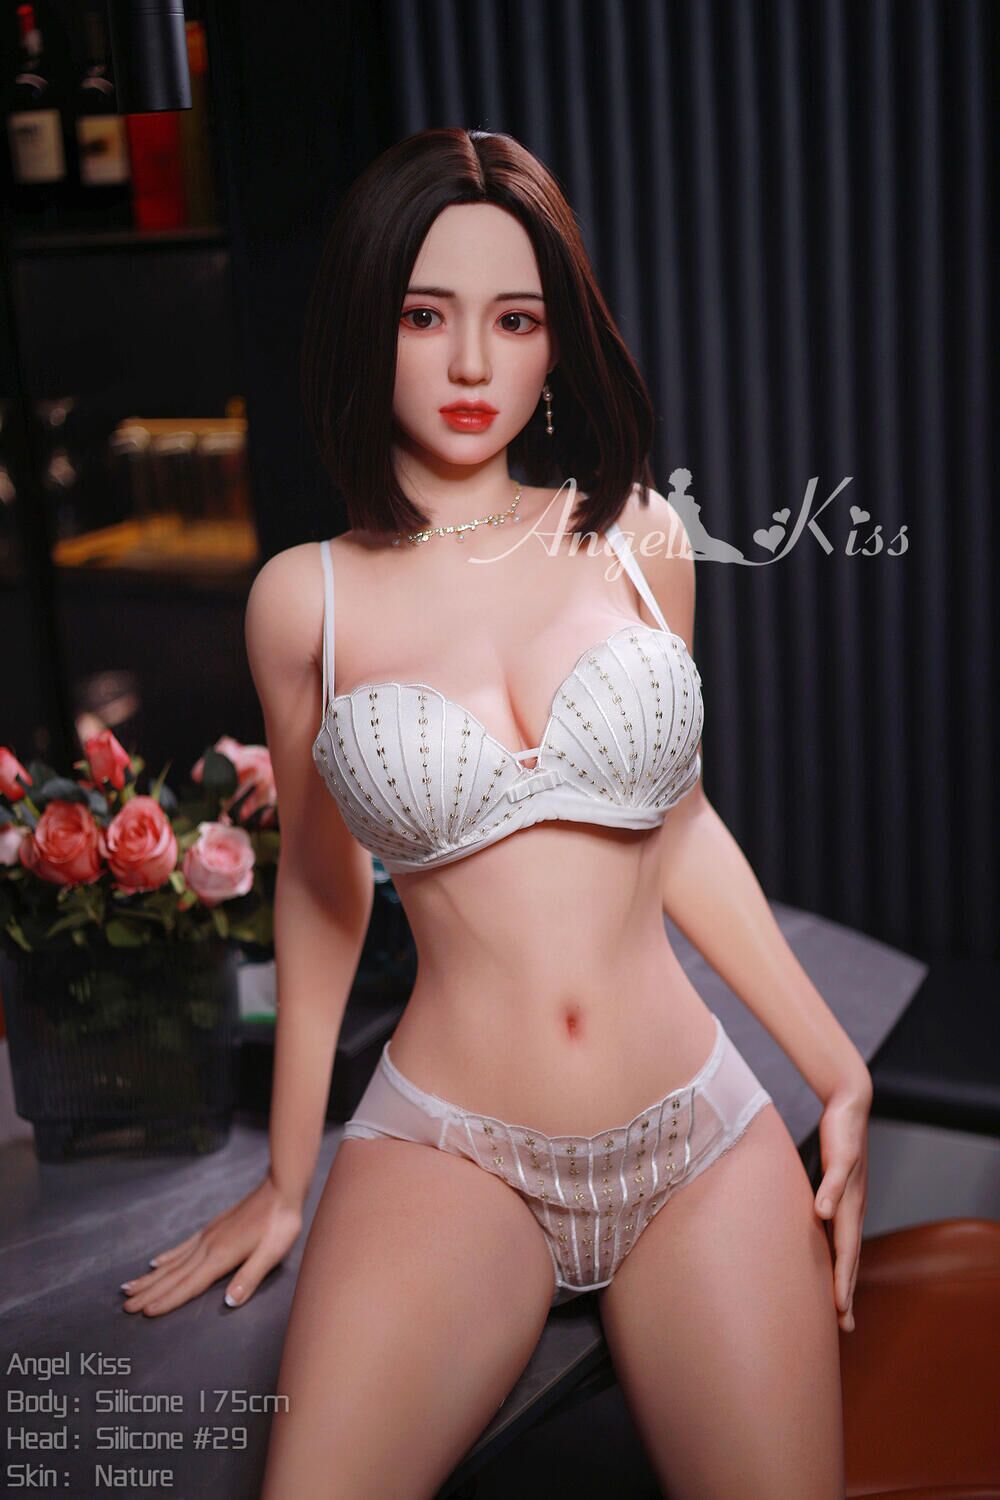 Angelkiss 175cm5ft9 D-cup Silicone Sex Doll – Charley at rosemarydoll